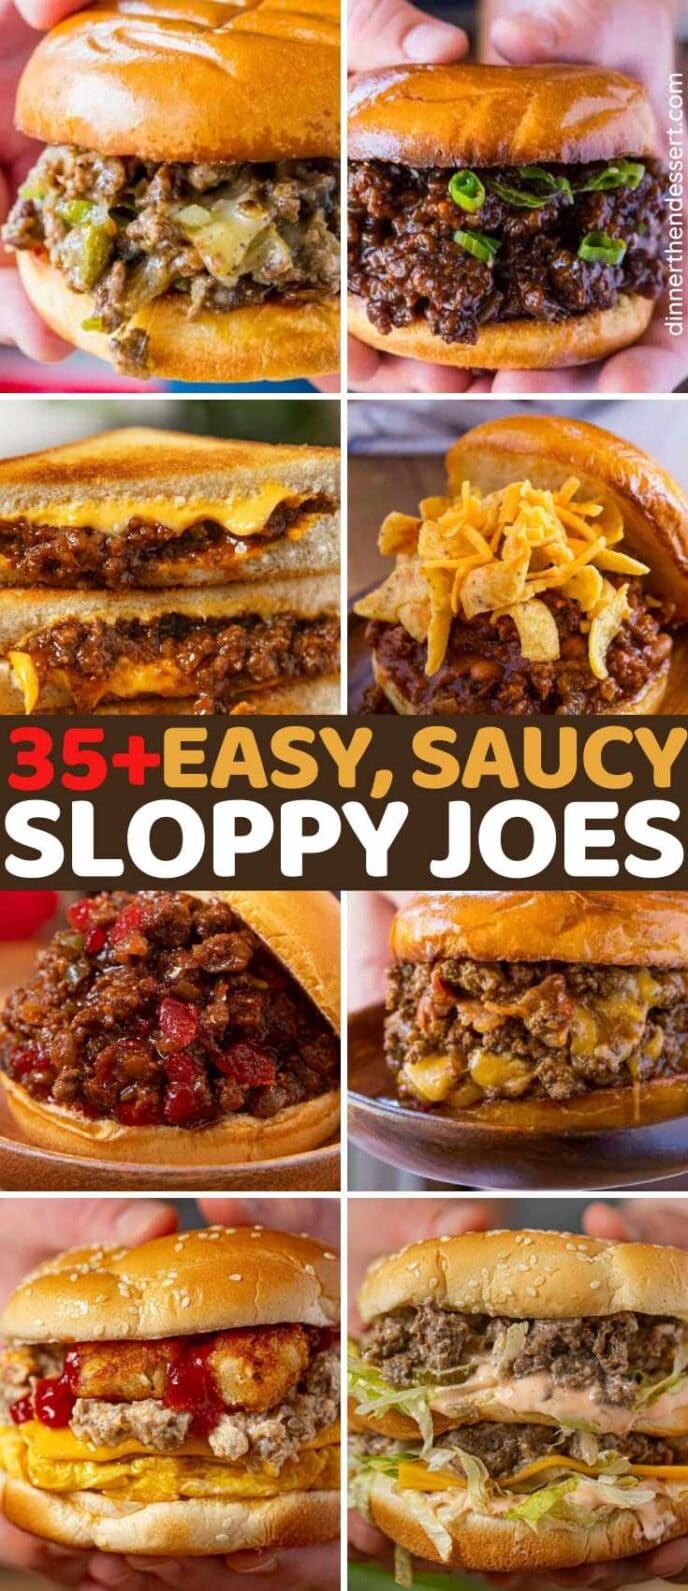 Collage of Sloppy Joes photos in tile format with title across middle